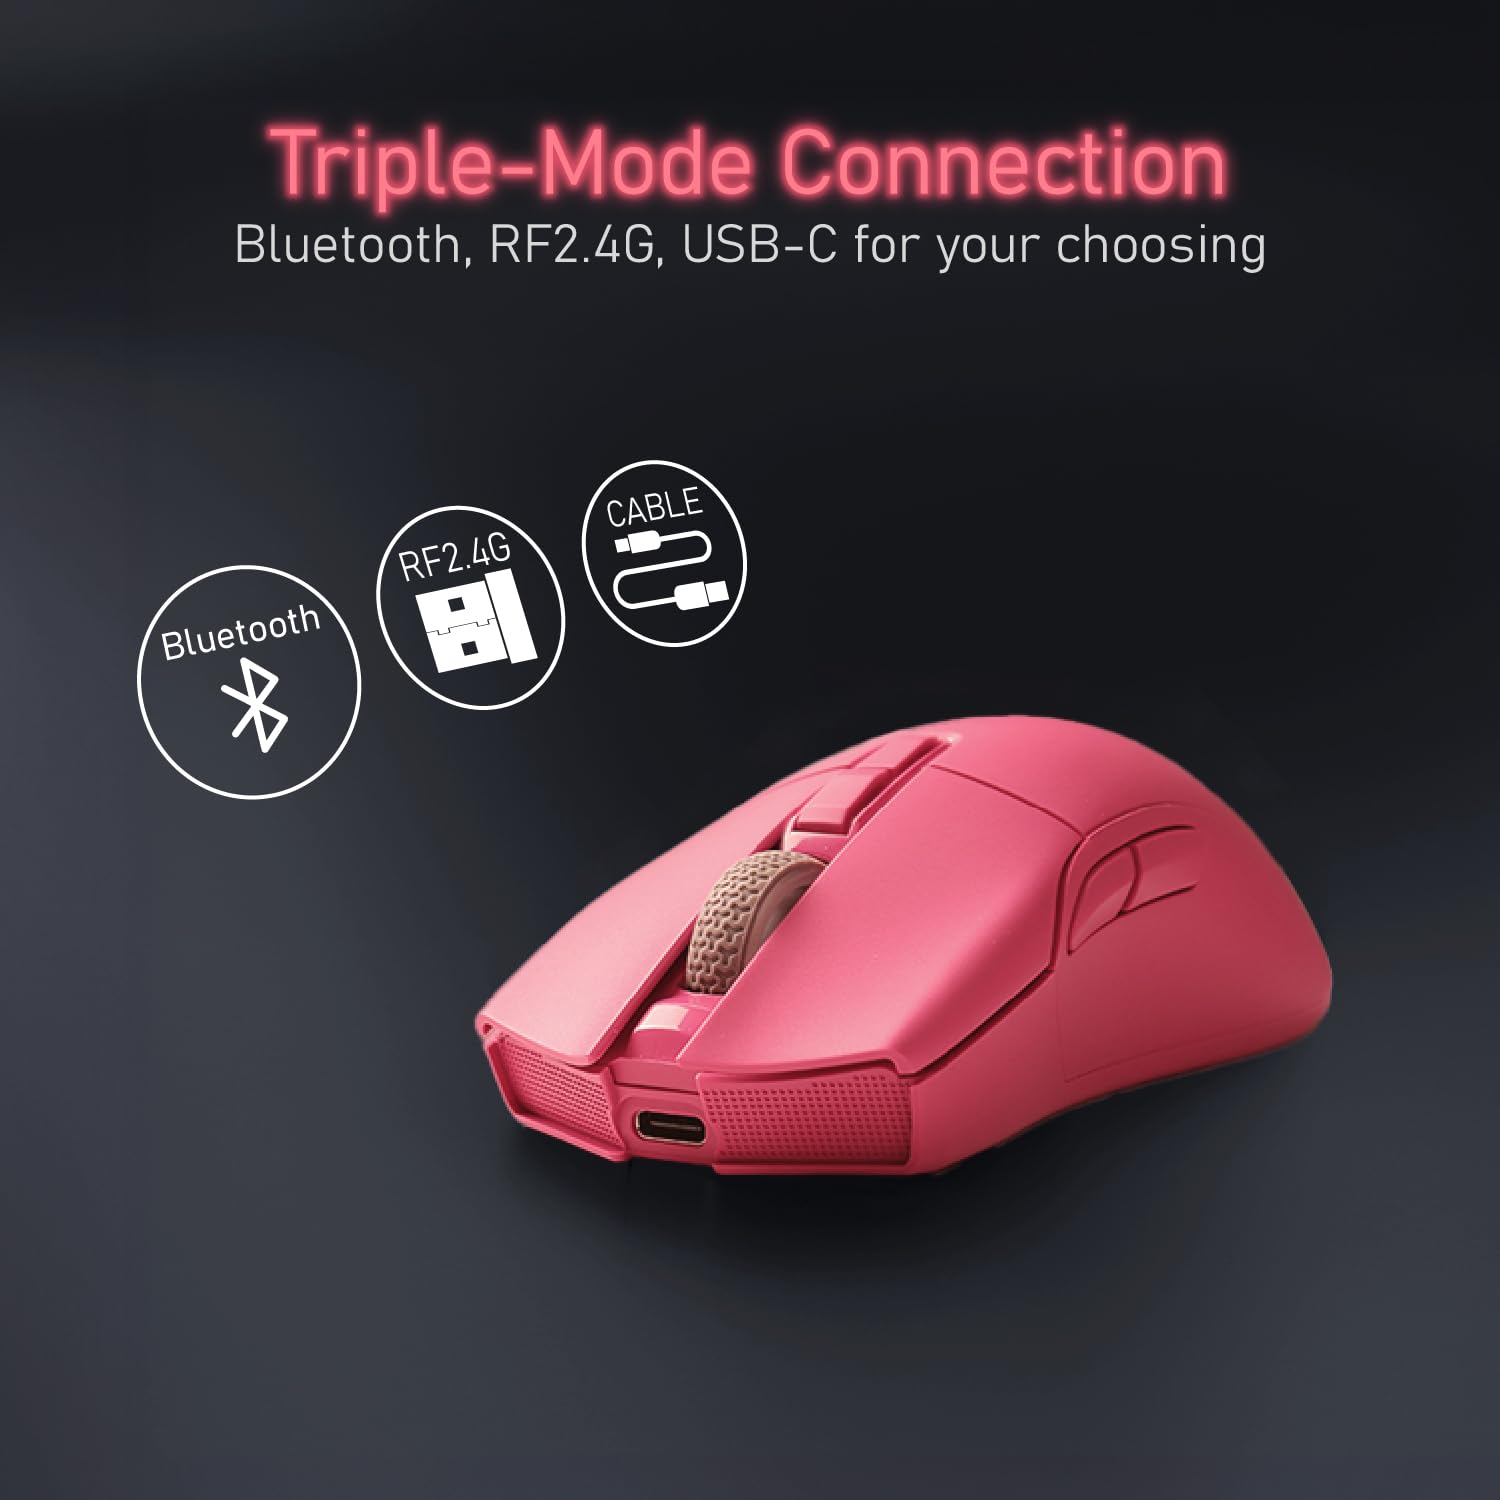 iRocks M31R Wireless Gaming Mouse, Triple Mode 2.4G/ Bluetooth/USB-C Detachable Cable Gaming Mouse, Kailh GM8.0 Mouse Switches, Advanced PixArt PAW3395 Optical Sensor, Up to 26,000 DPI - Pink